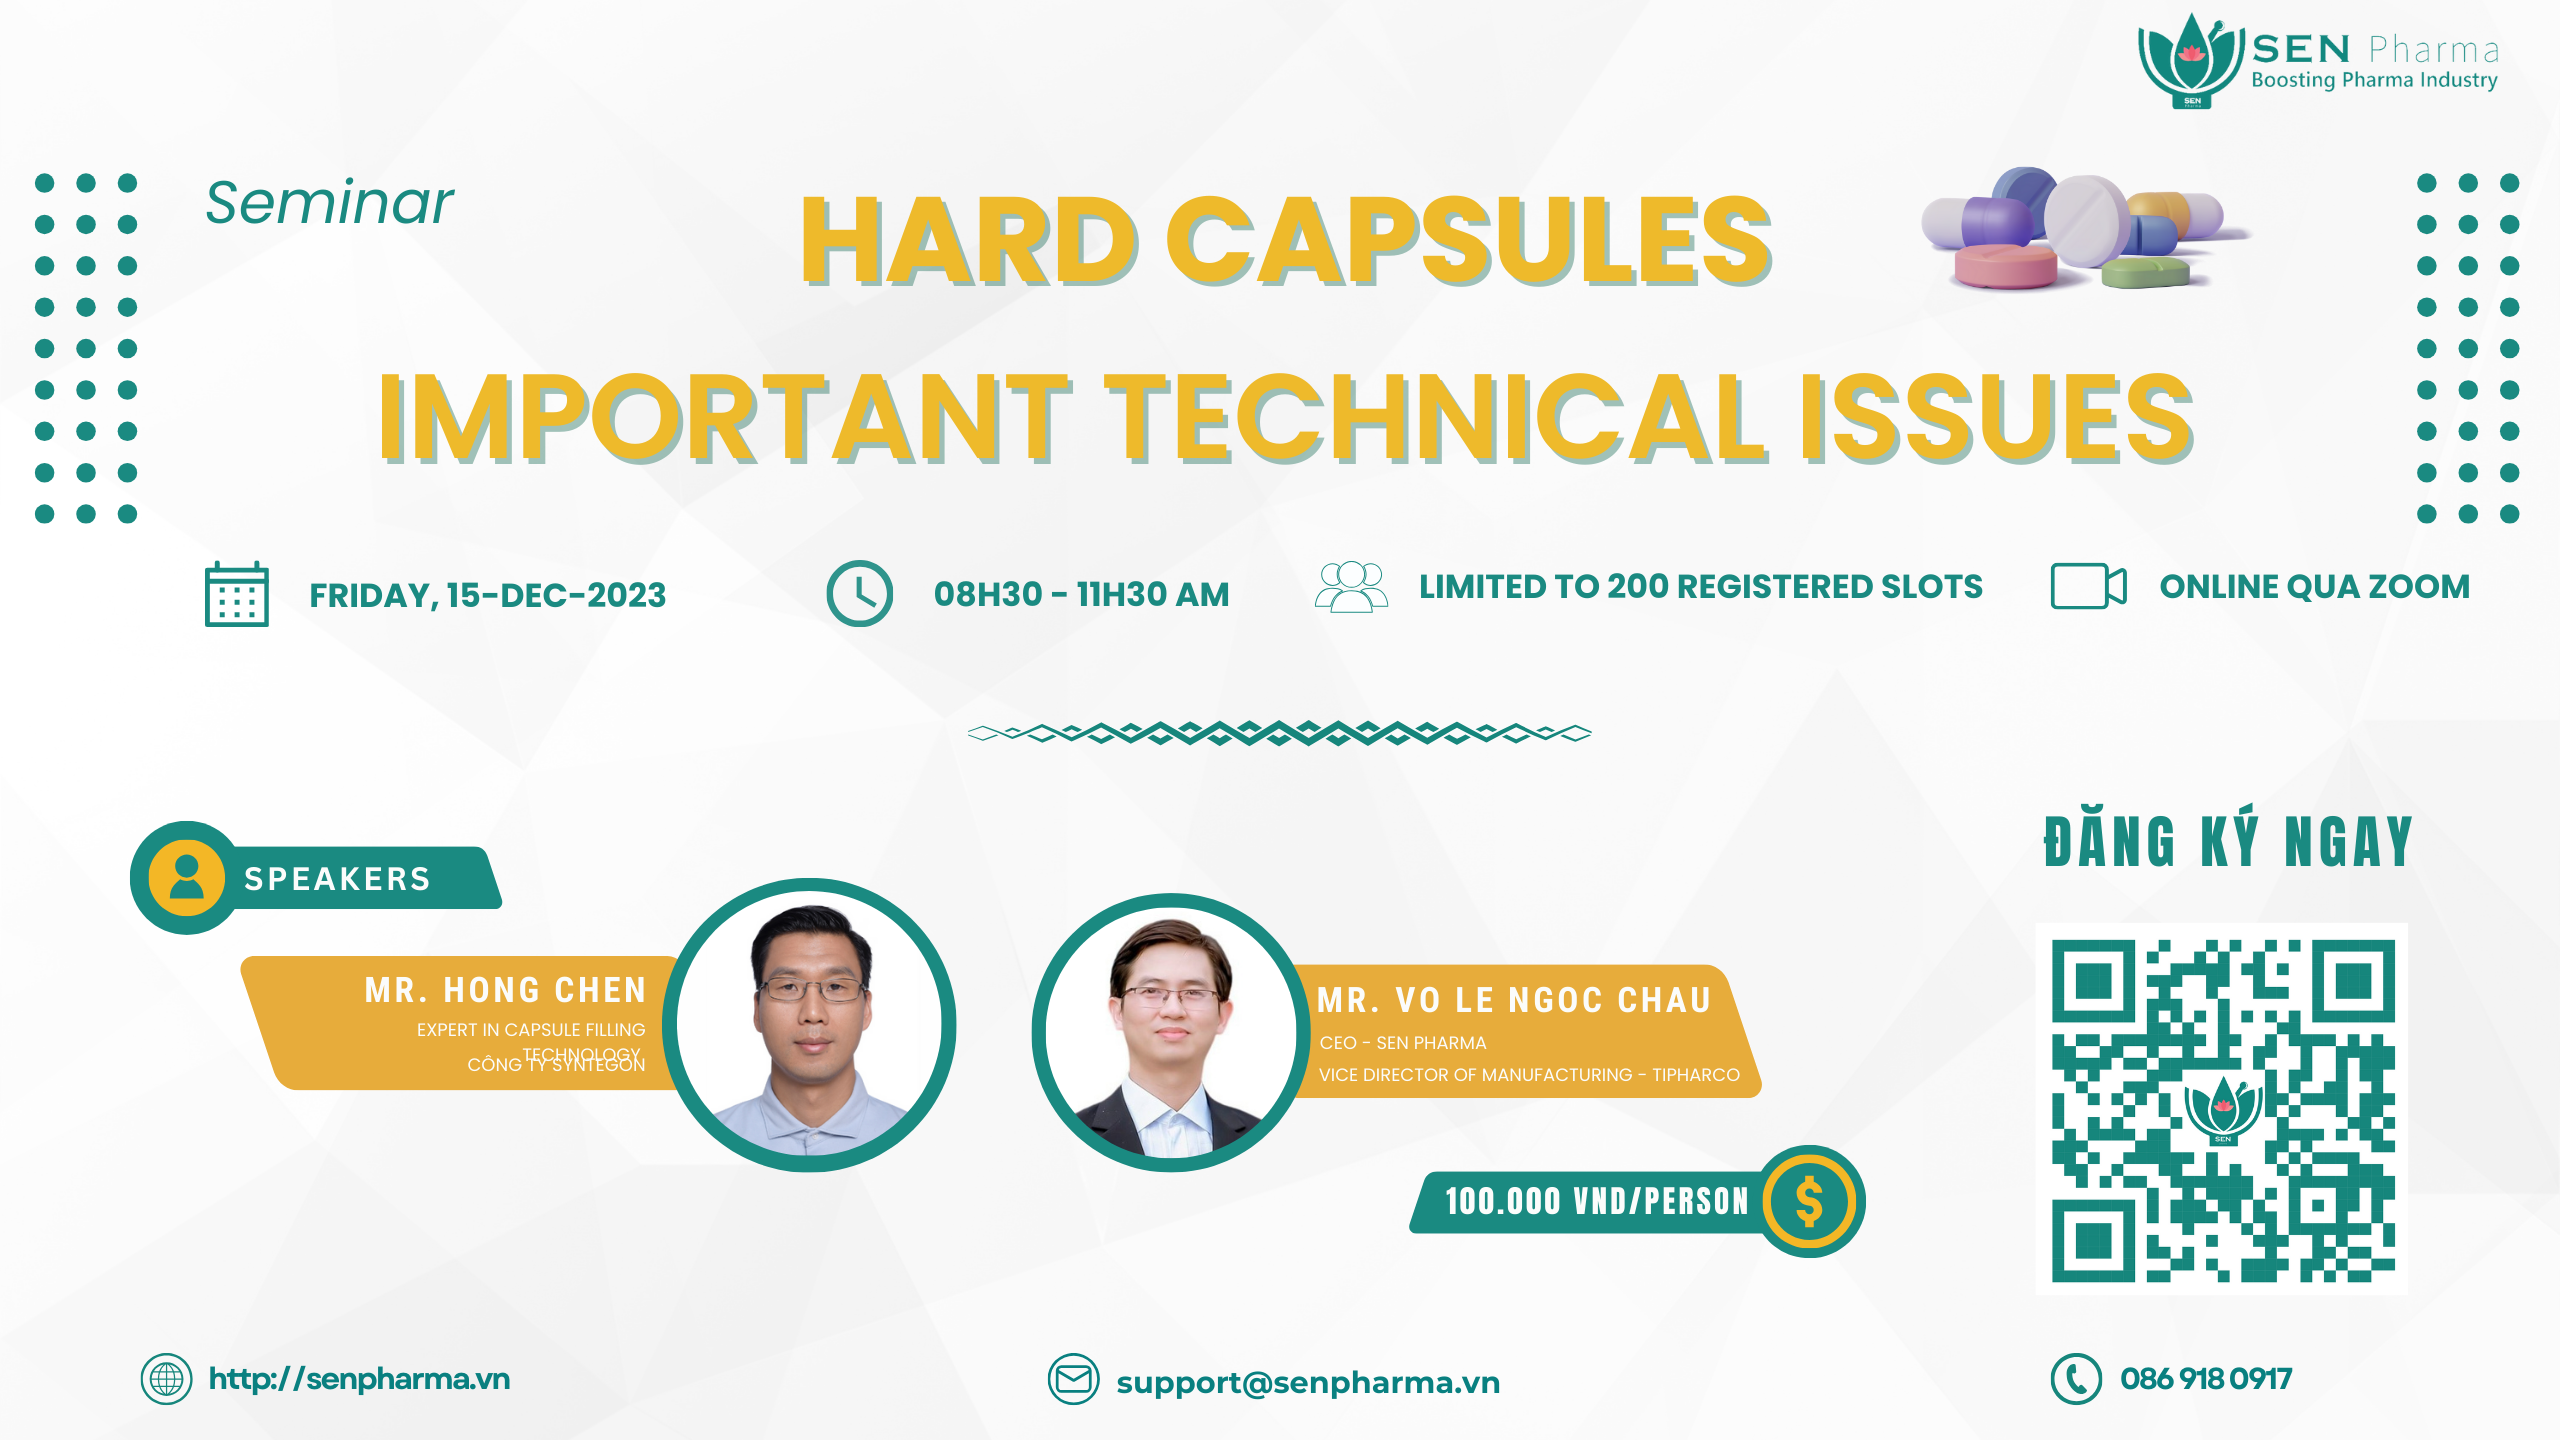 Seminar Hard capsules: Important technical issues